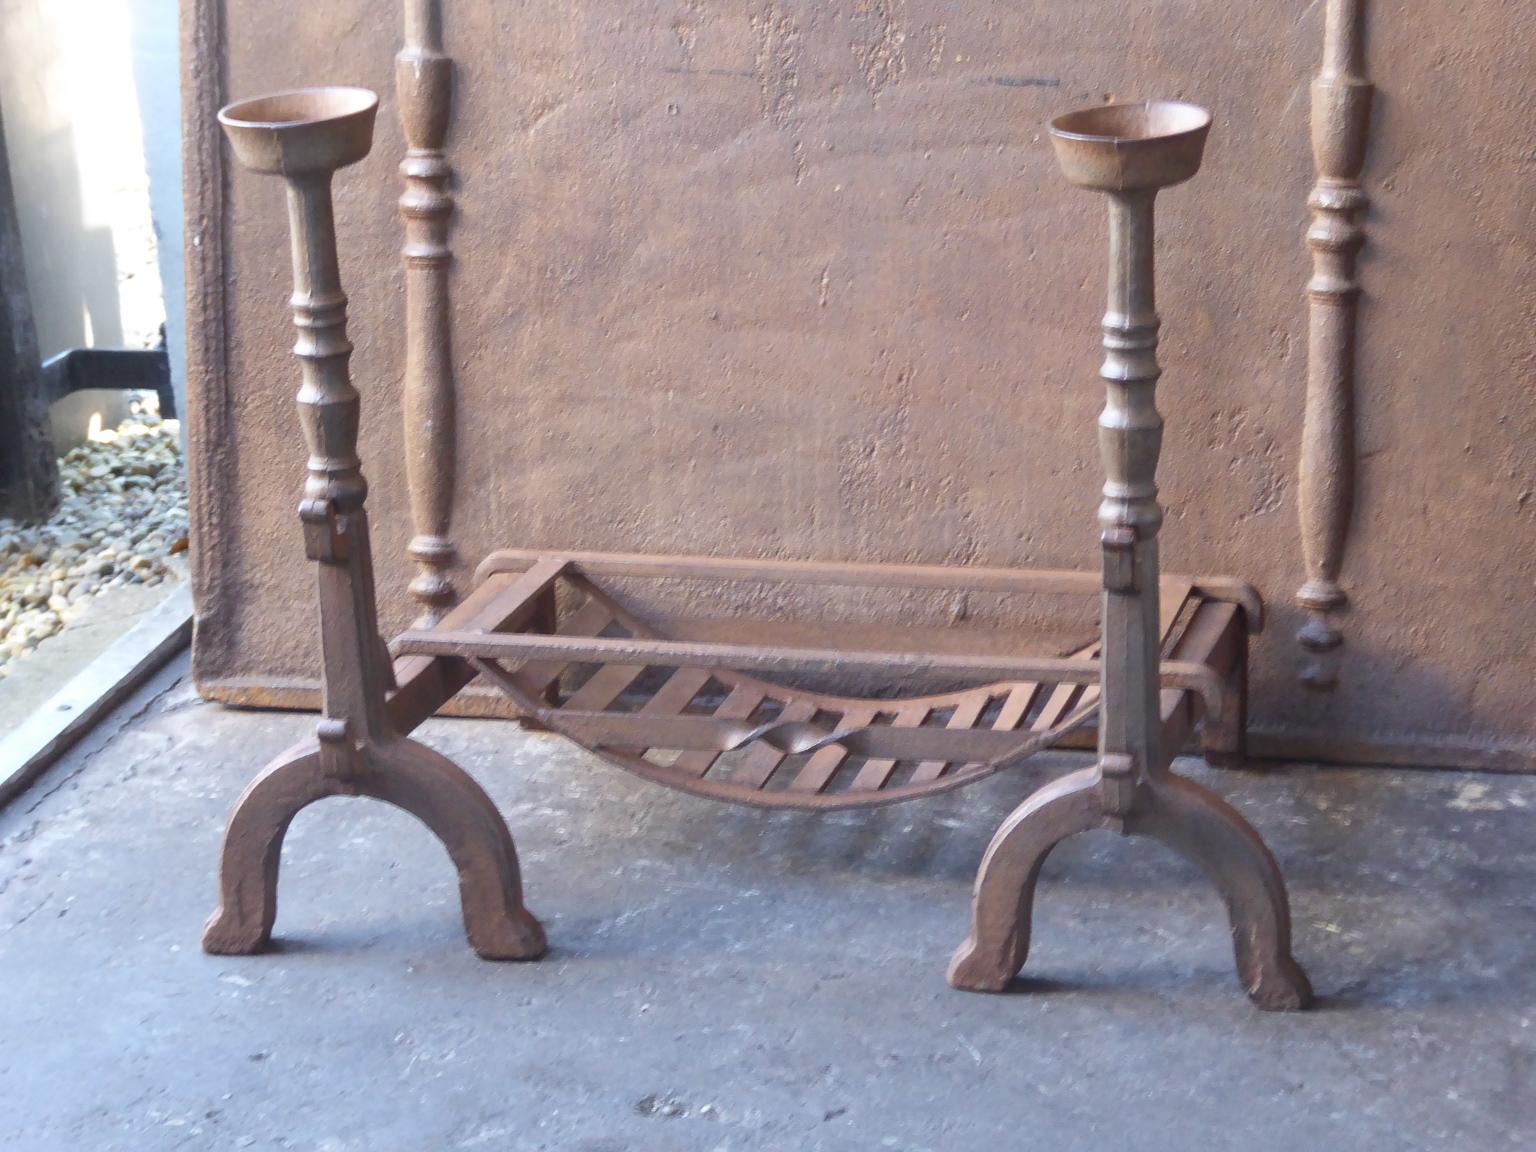 19th century English Victorian fireplace grate made of cast iron and wrought iron. The grate has a natural brown patina. Upon request it can be made black. The total width of the front of the grate is 32 inch (81 cm).

This product has to be shipped